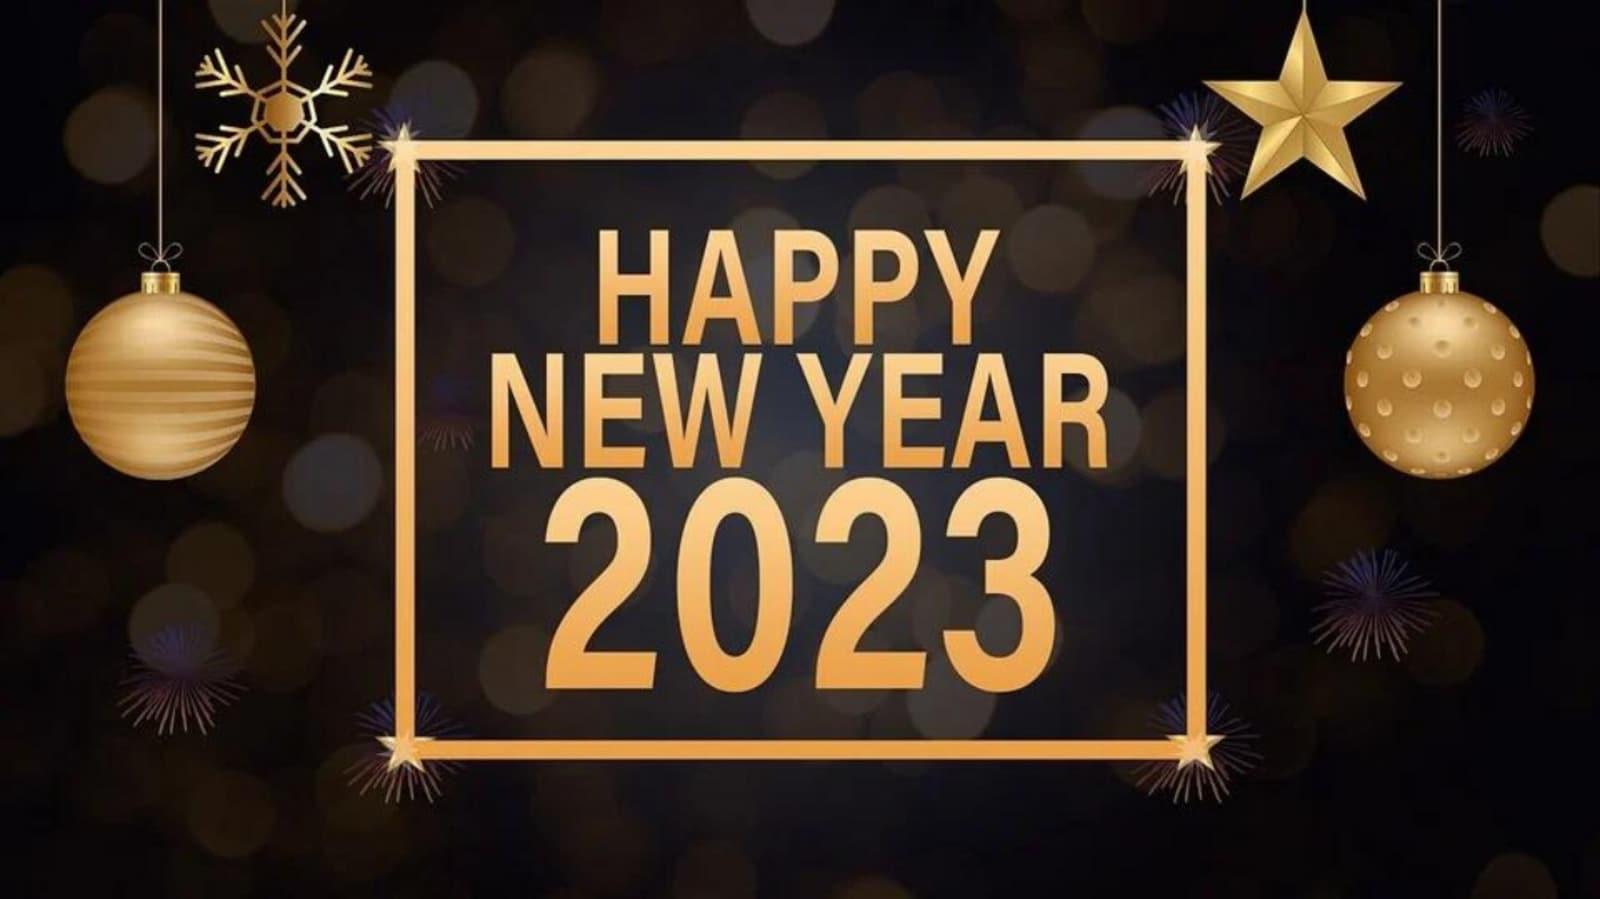 How And Where To Find Able Image For Happy New Year